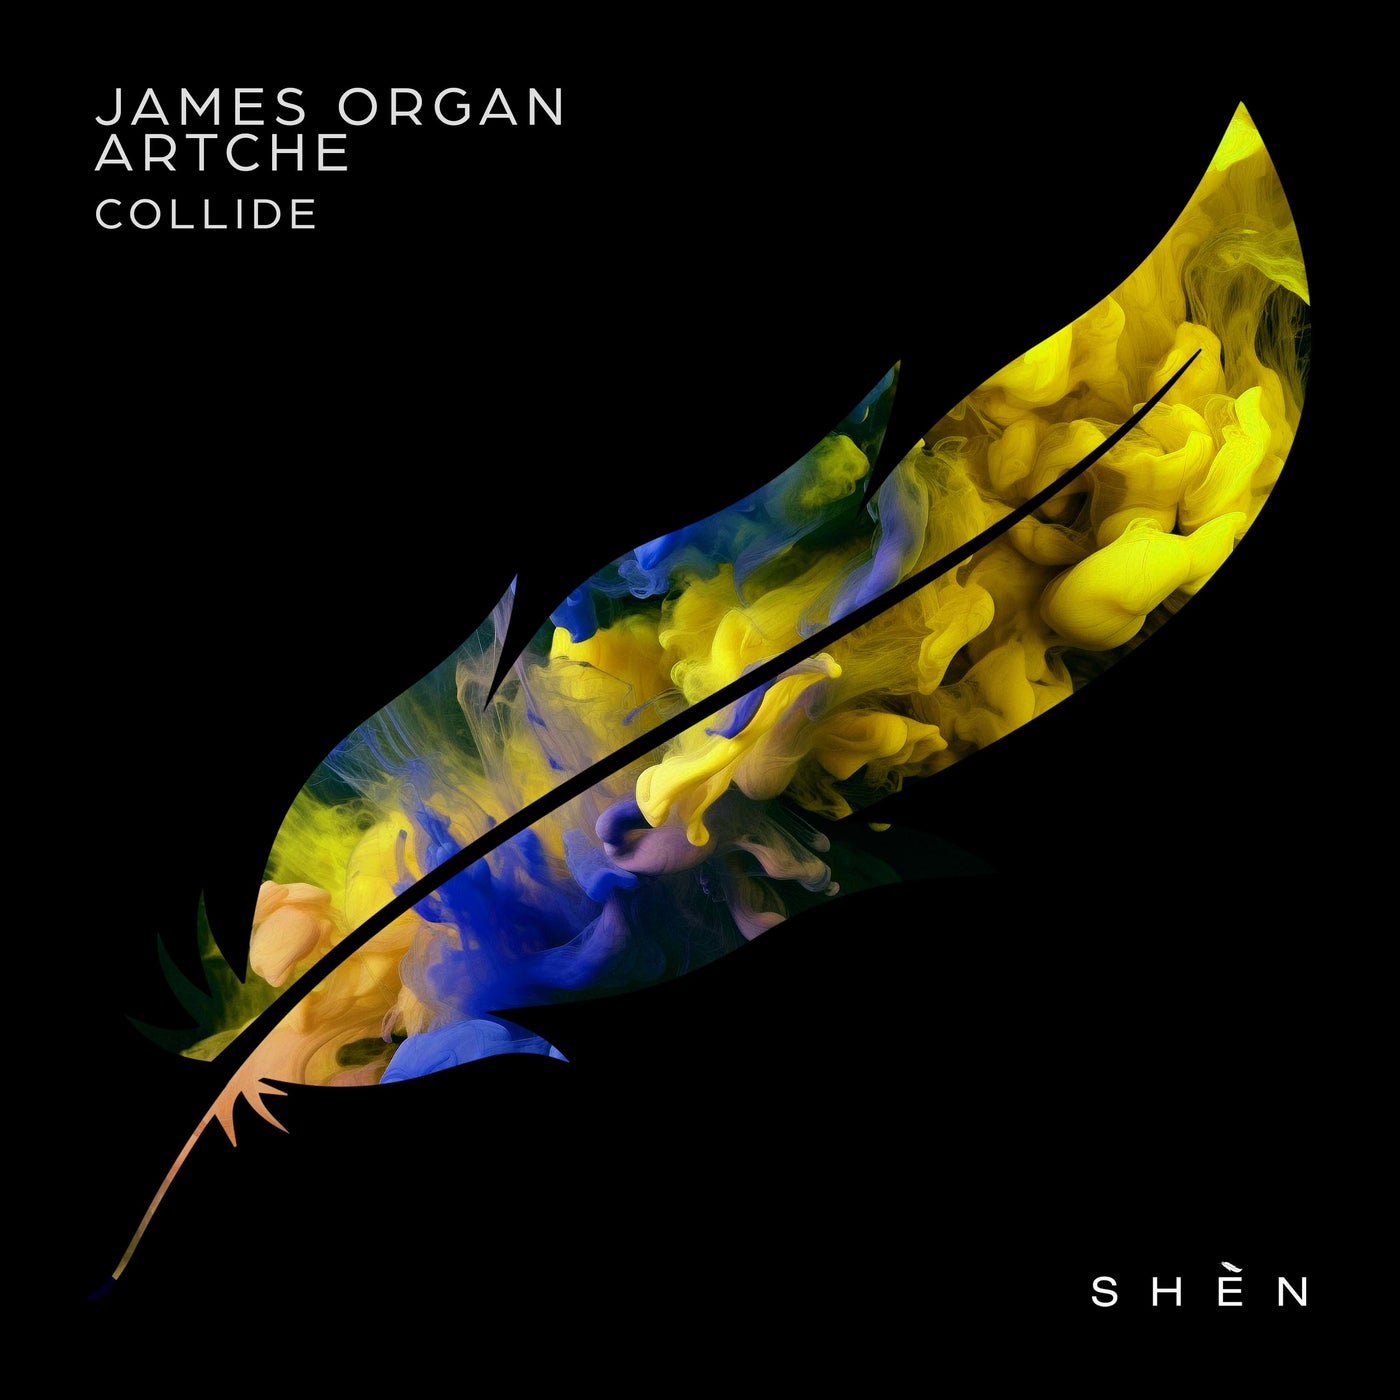 image cover: James Organ & Artche - Collide (Extended) [085365390386] on SHÈN Recordings